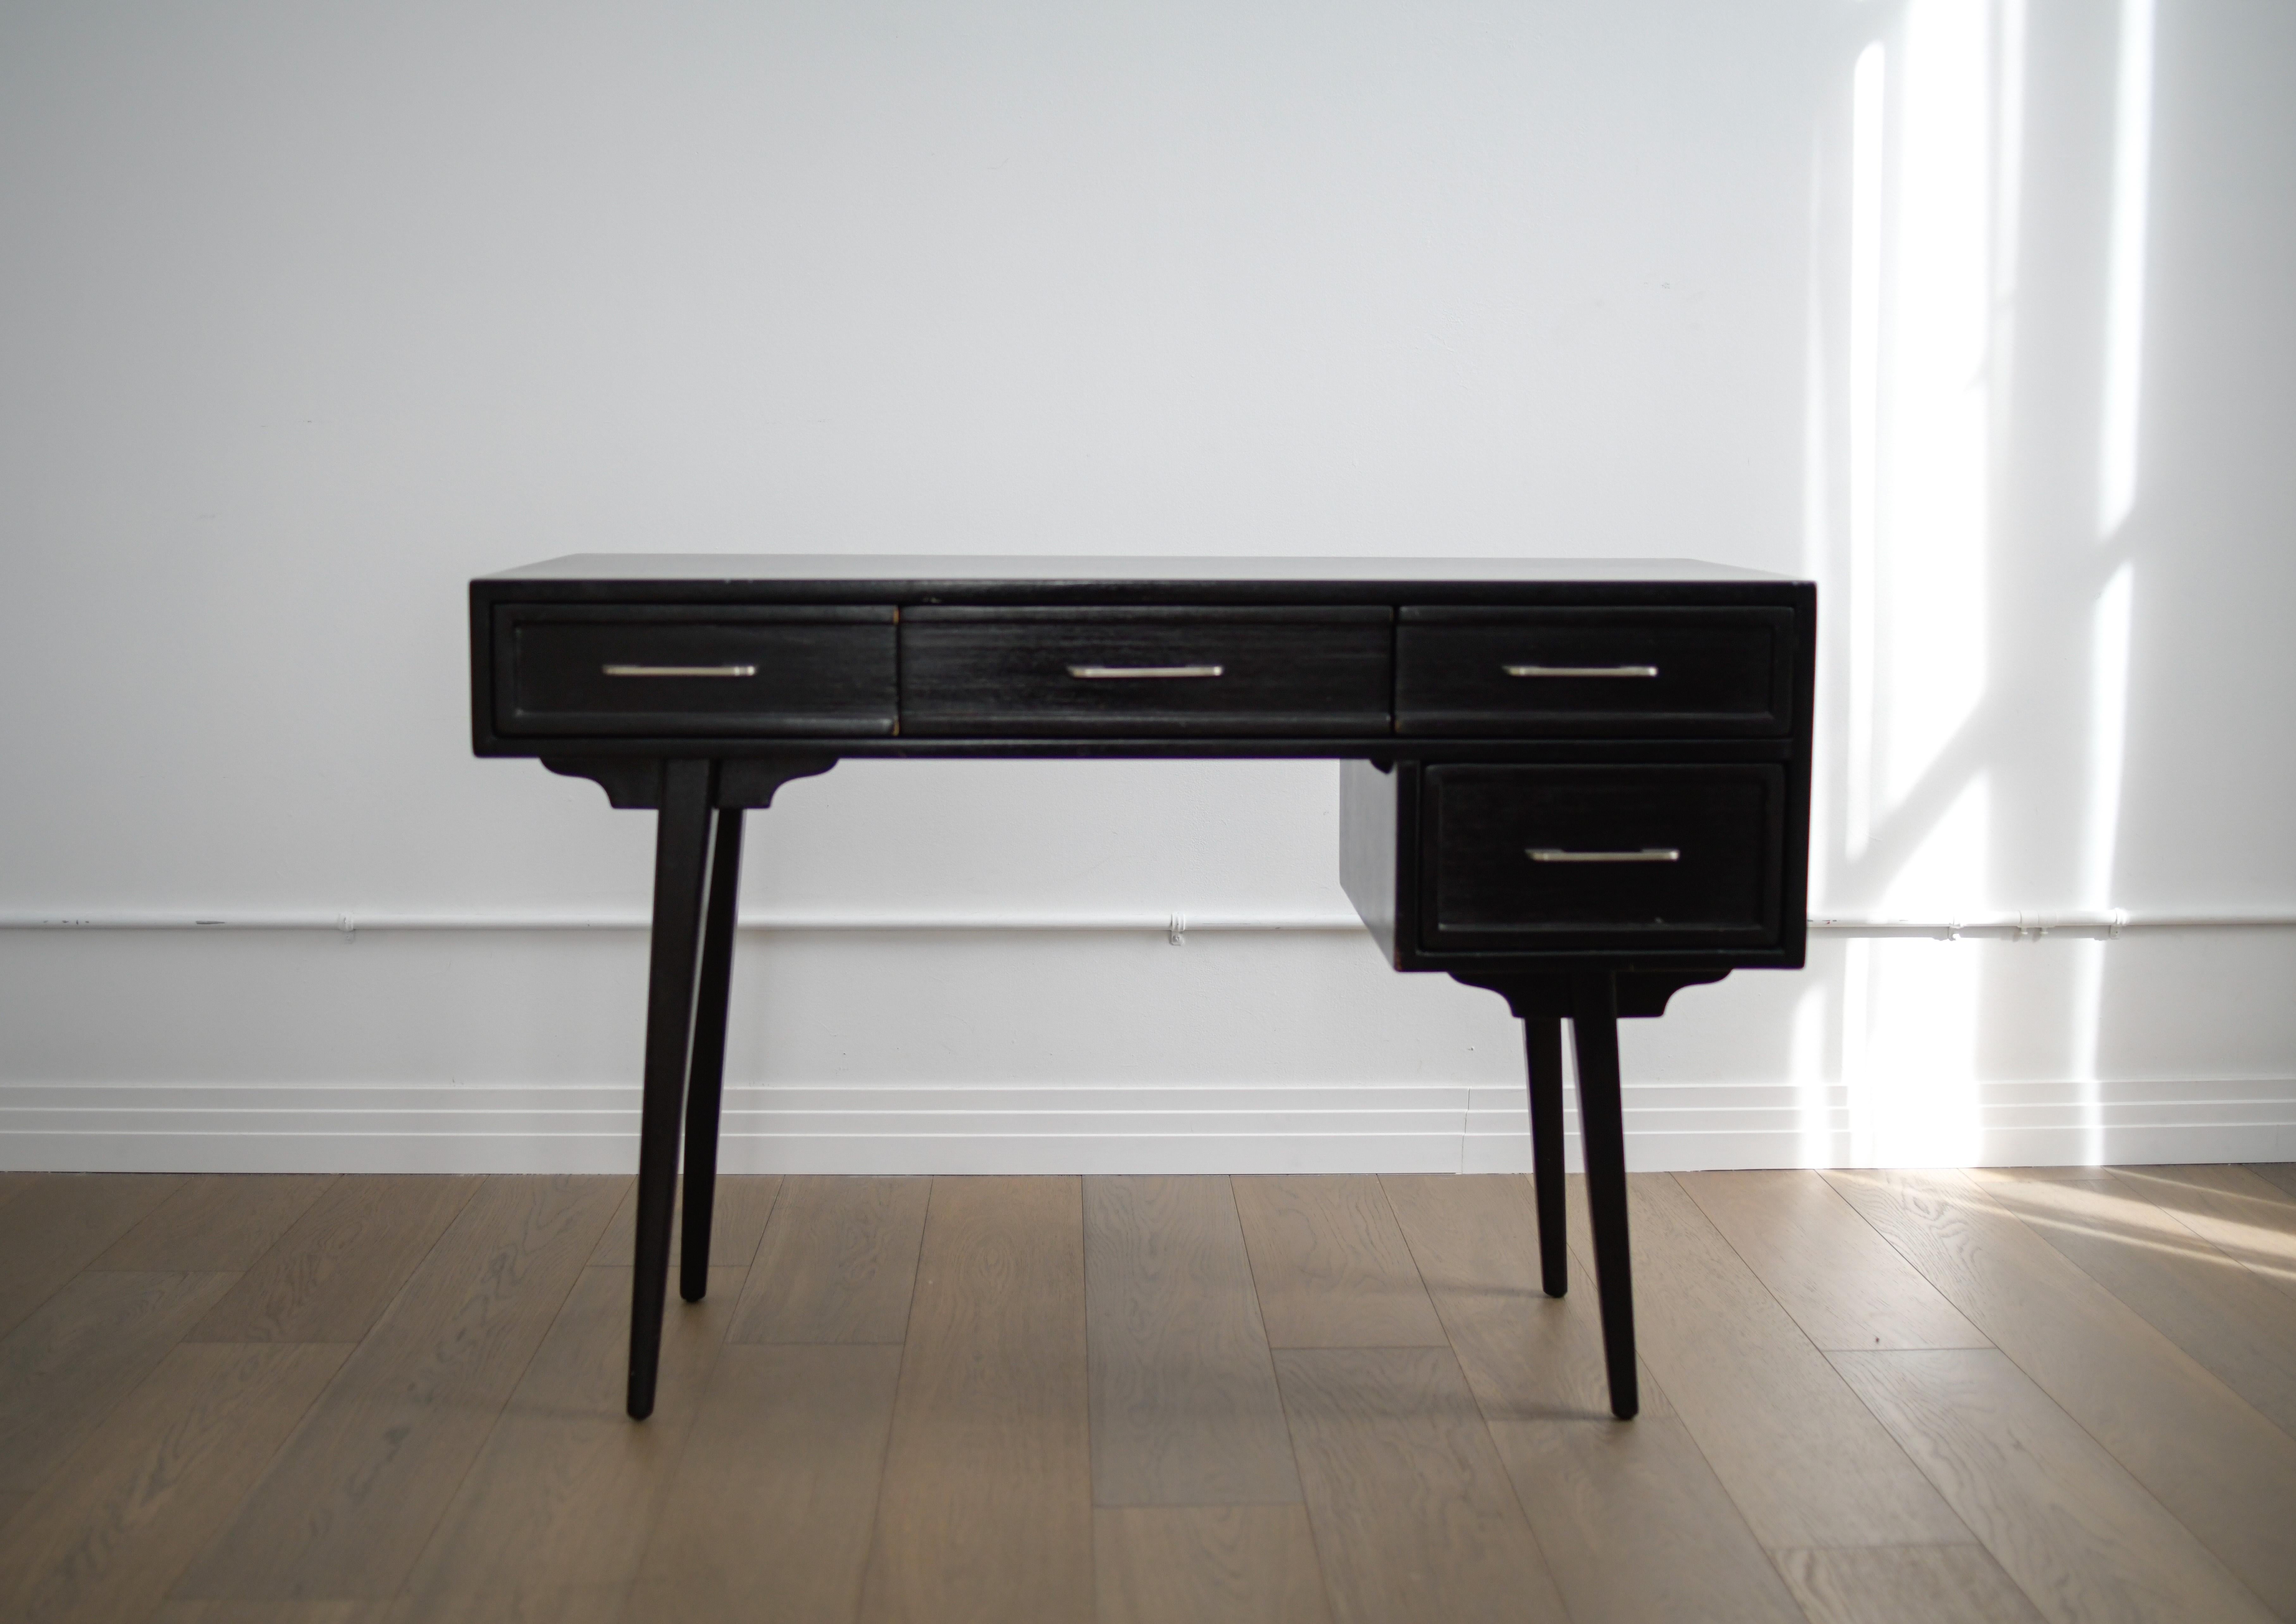 Extremely rare Rway black mid century desk with silver hardware. This desk in in decent vintage condition with some considerable scratching to the top. Looks like It was used as a writing desk. Despite that, it presents well and we also have a glass